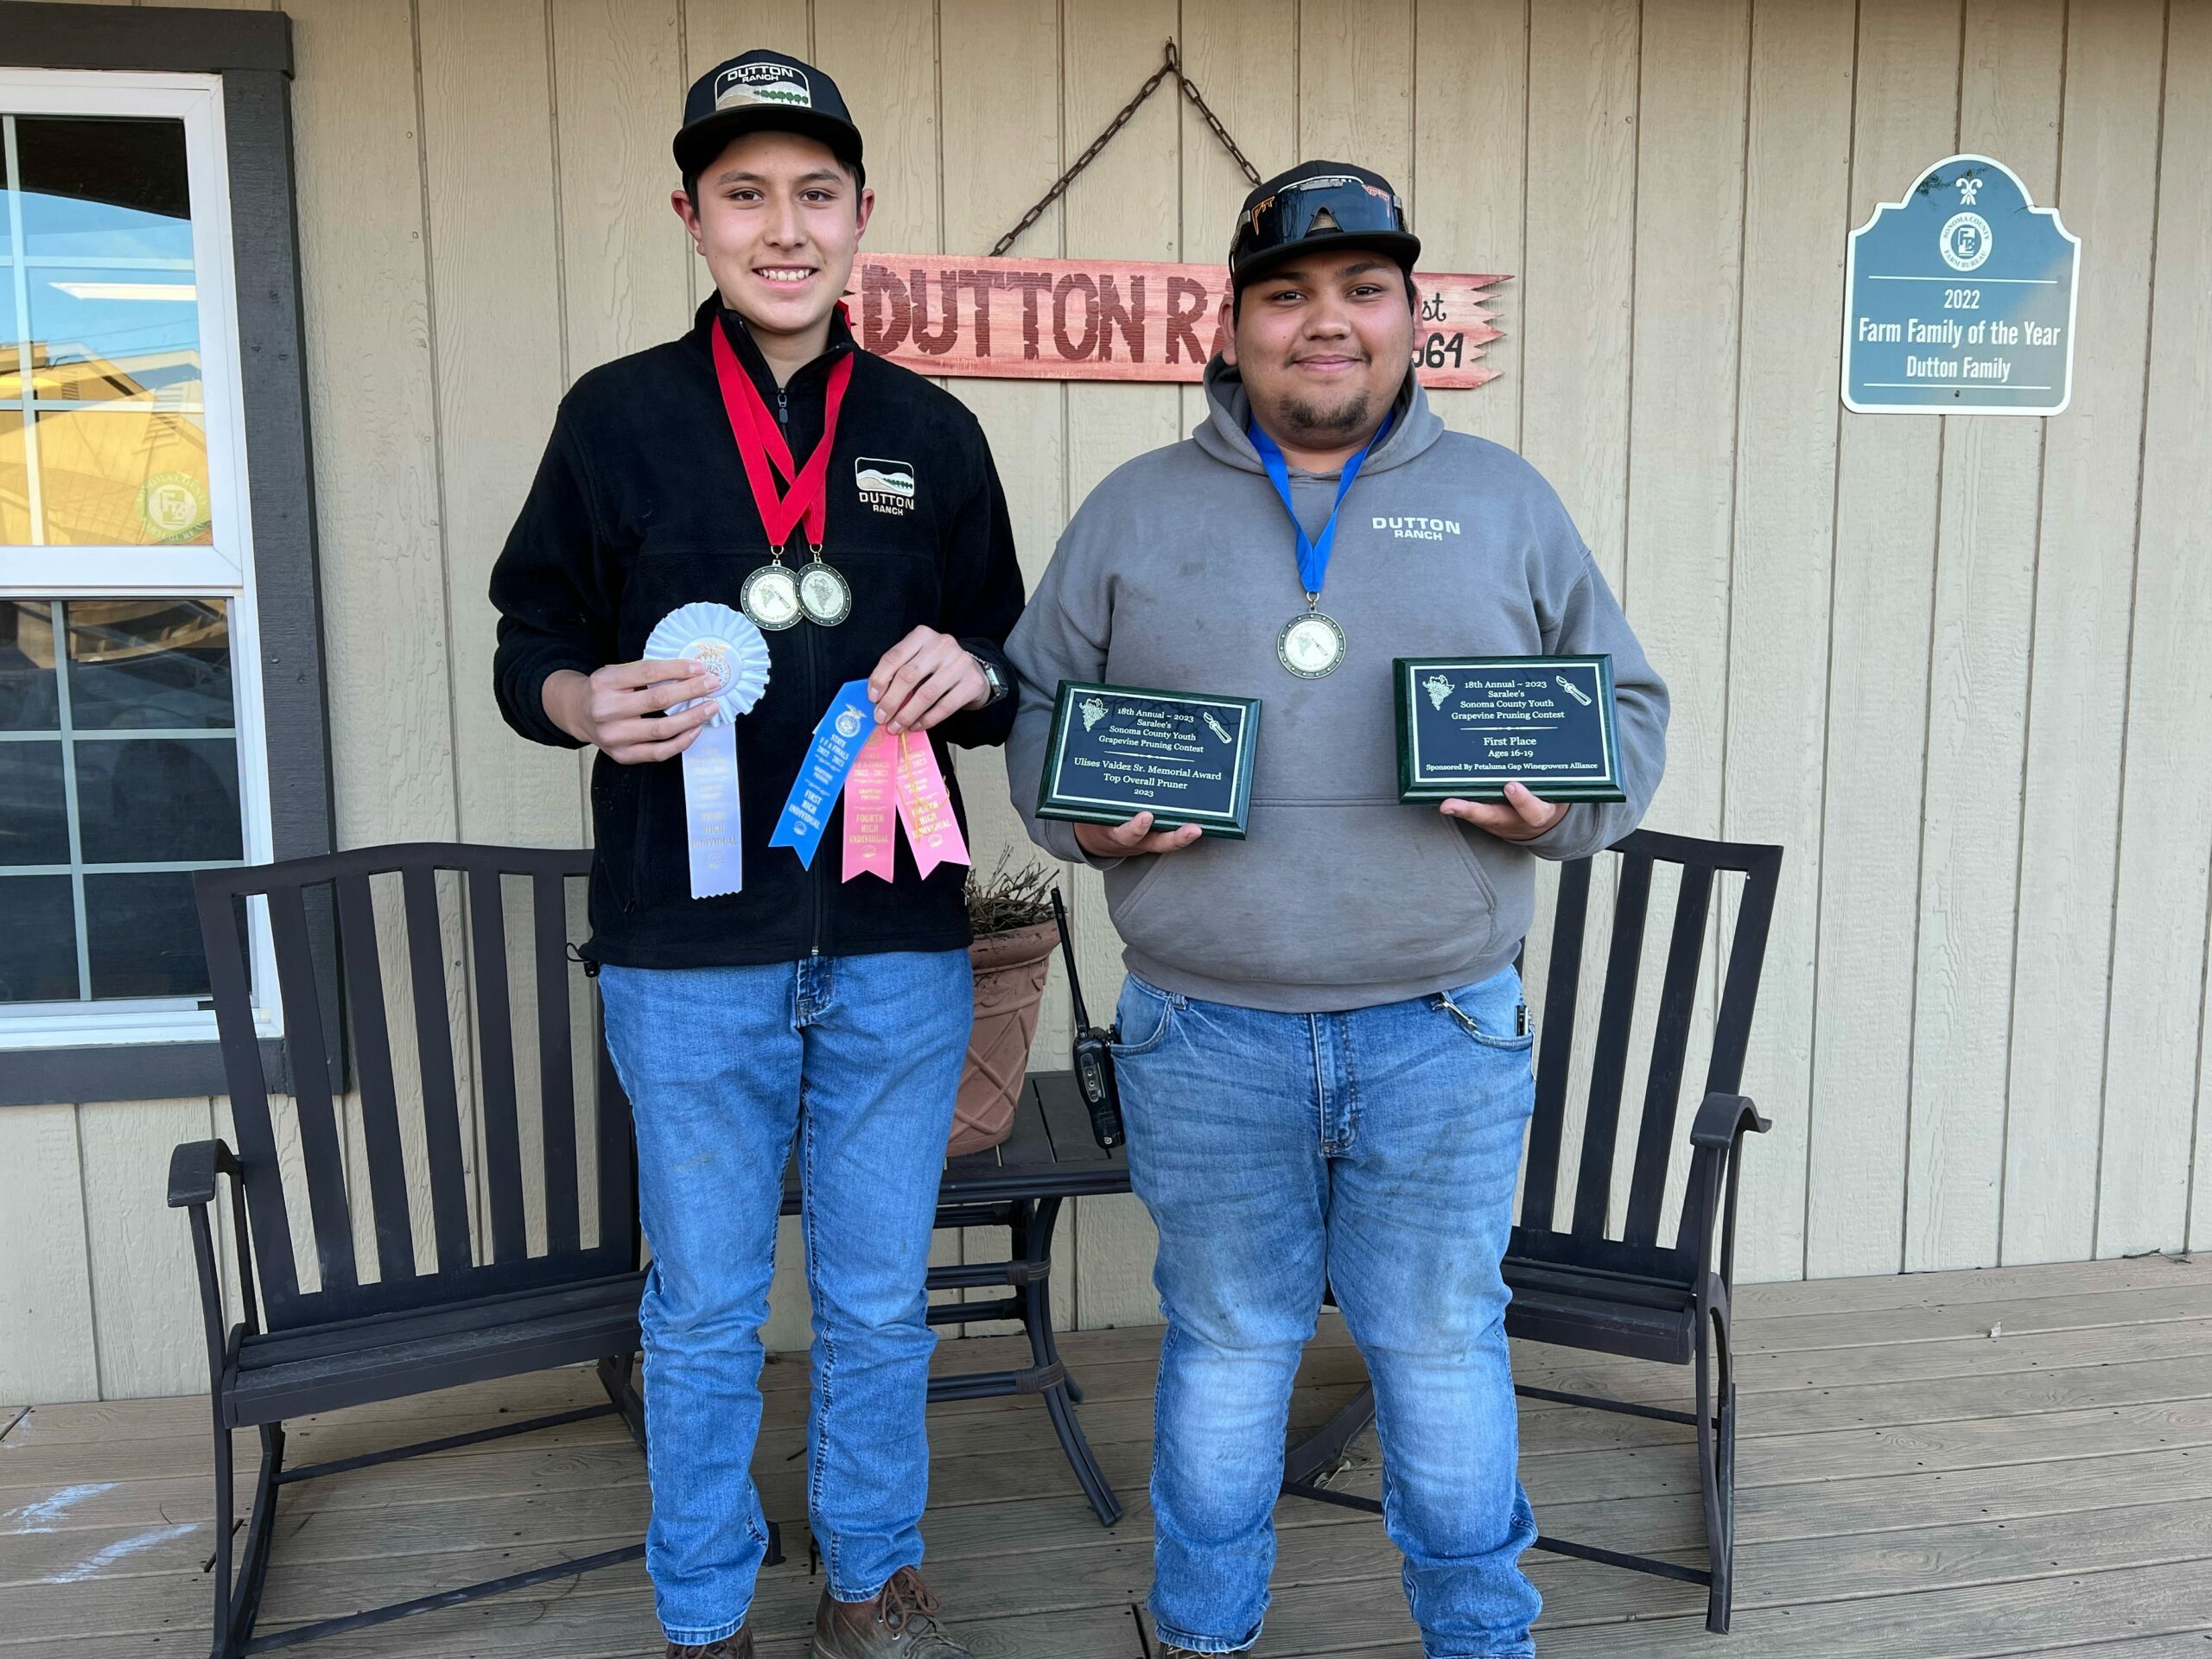 Young future farmers holding awards